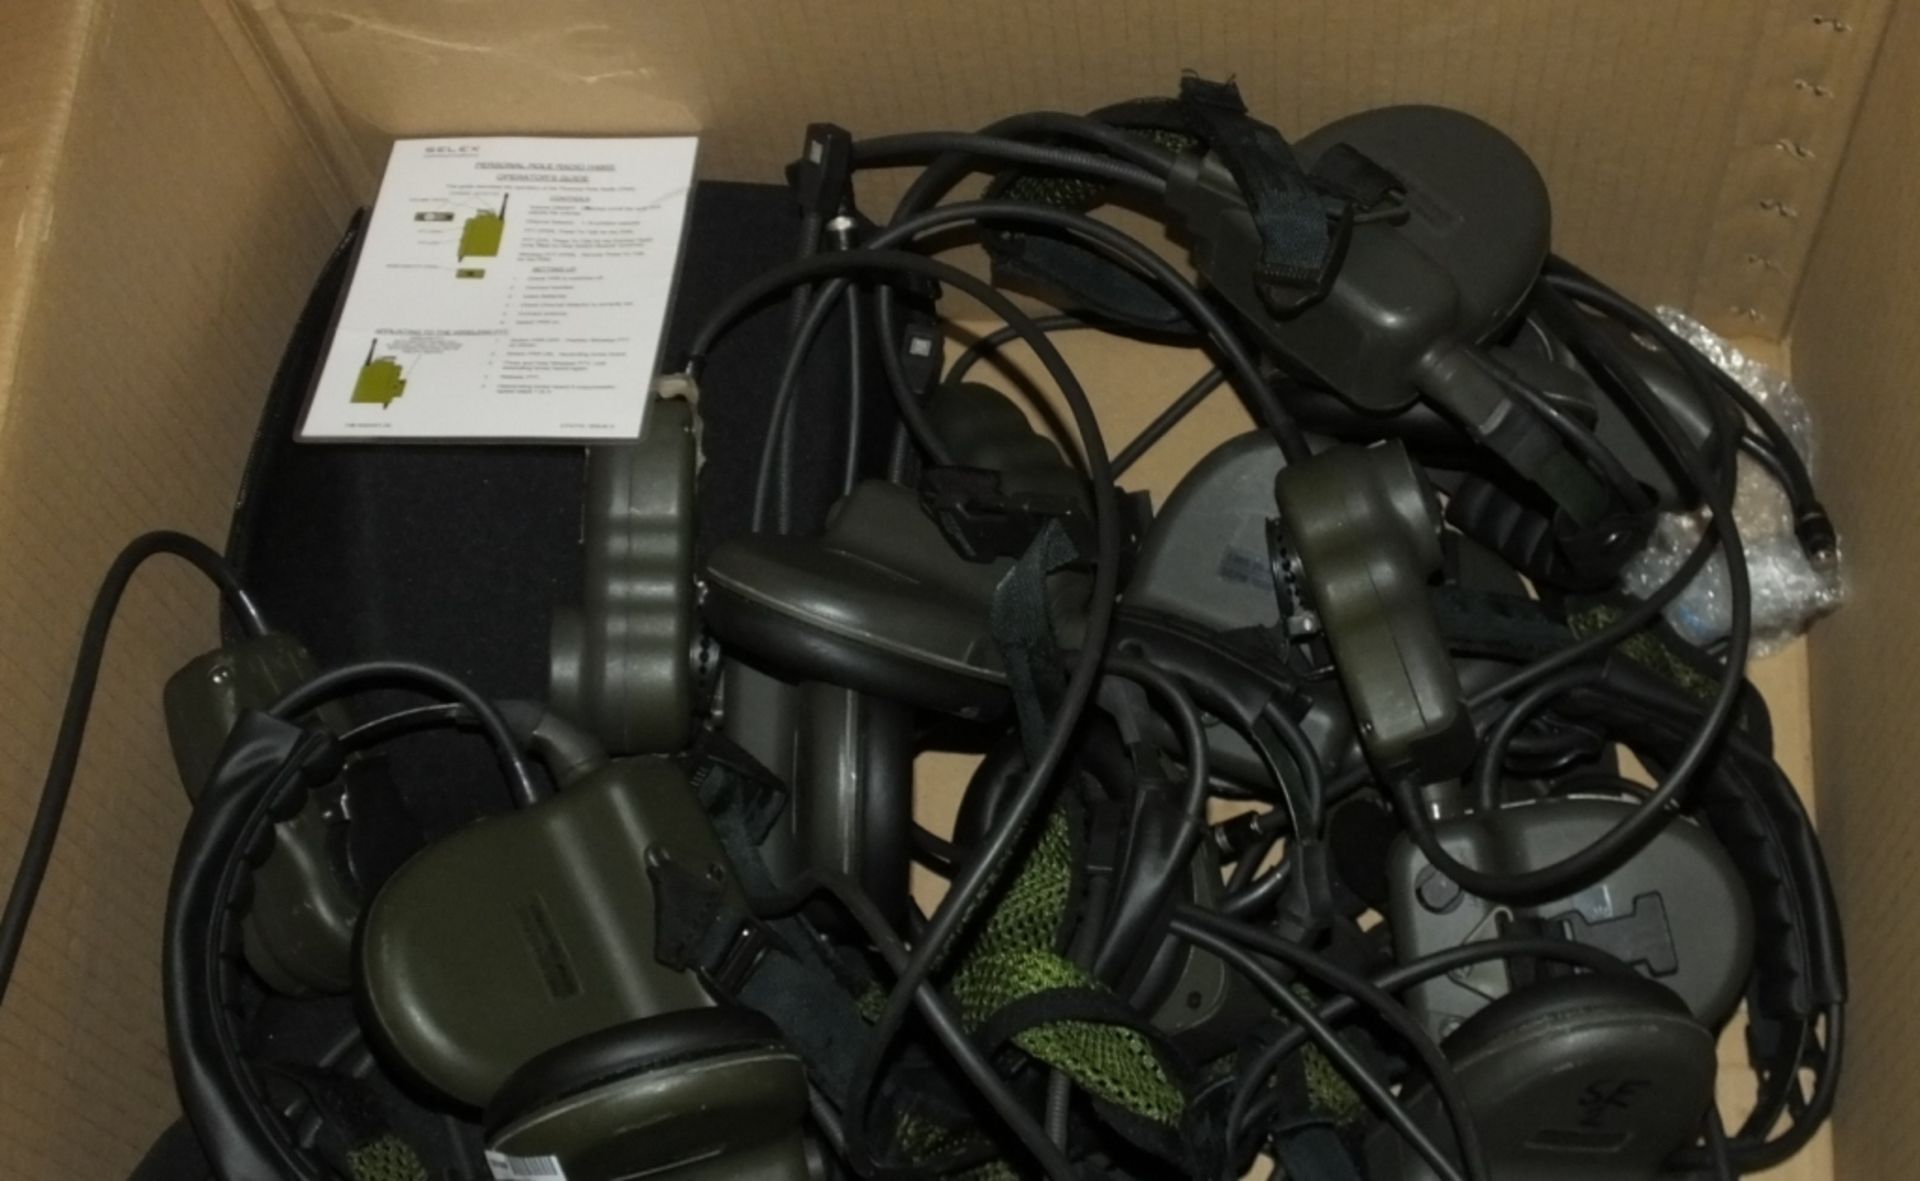 12x Selex Personal Role Radio H4855 Headsets - Image 3 of 3